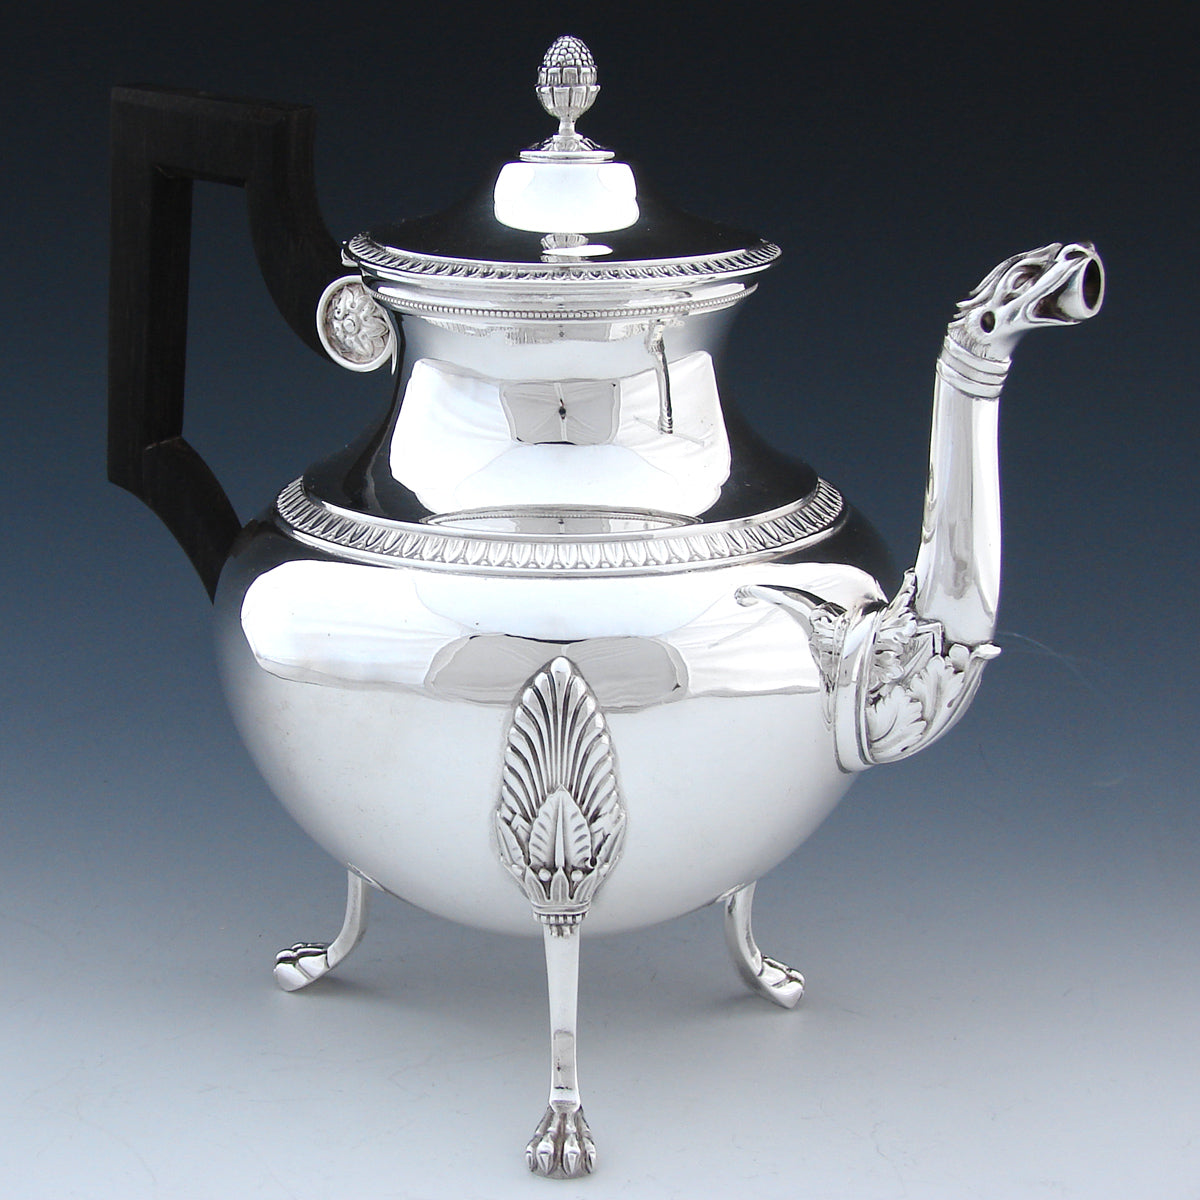 Antique French ODIOT Hallmarked Sterling Silver 4pc Coffee & Tea Service, Set, Empire Style